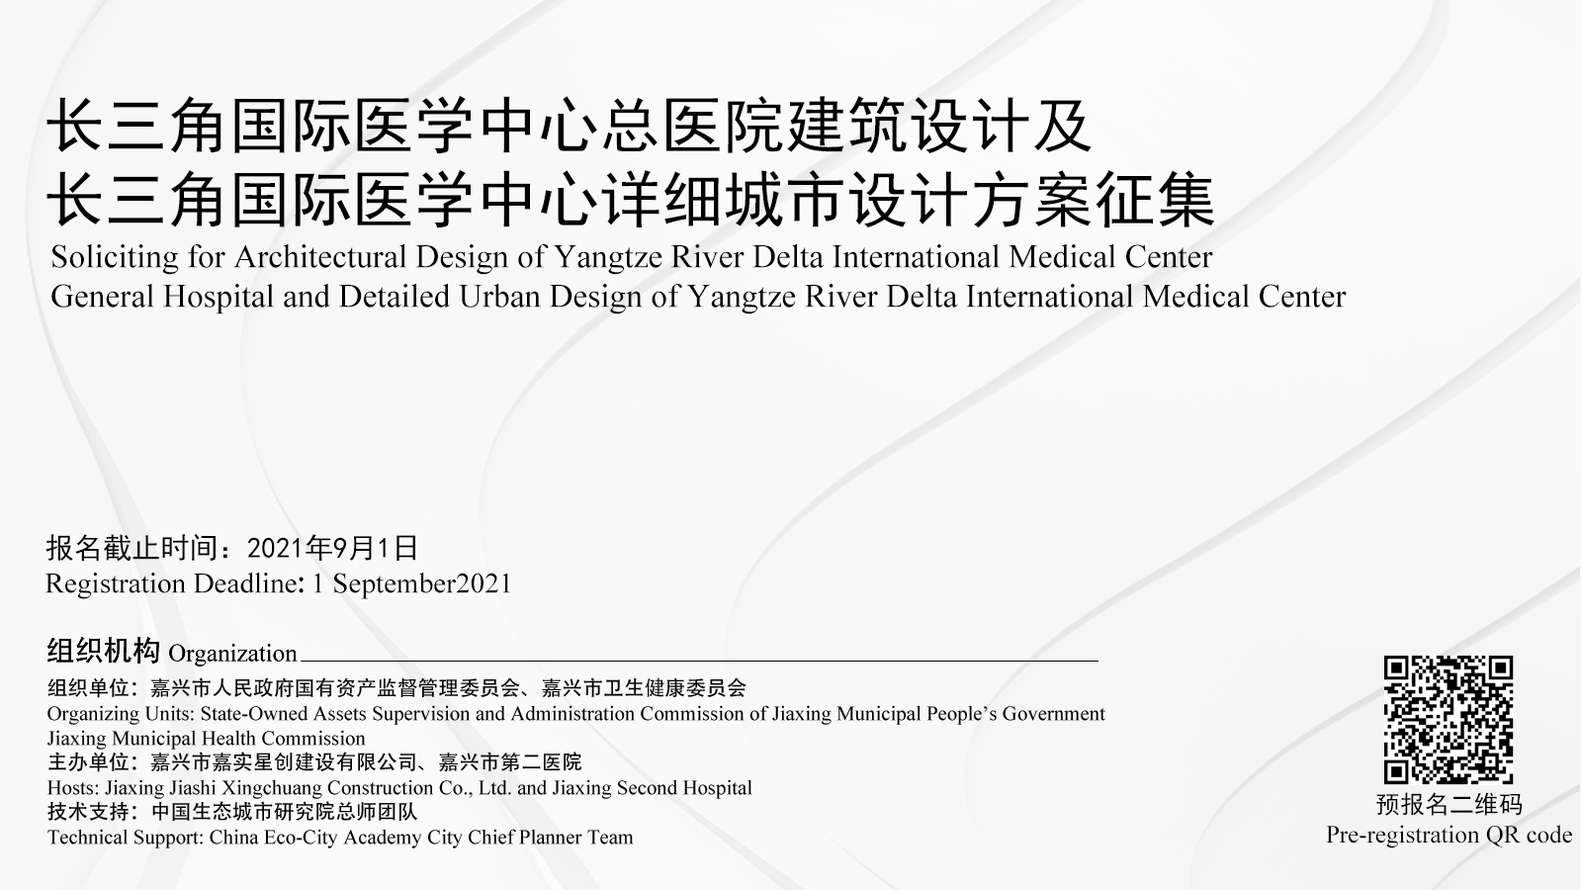 Call for Entries: Announcement of Soliciting for Architectural Design of Yangtze River Delta International Medical Center General Hospital and Detailed Urban Design of Yangtze River Delta International Medical Center